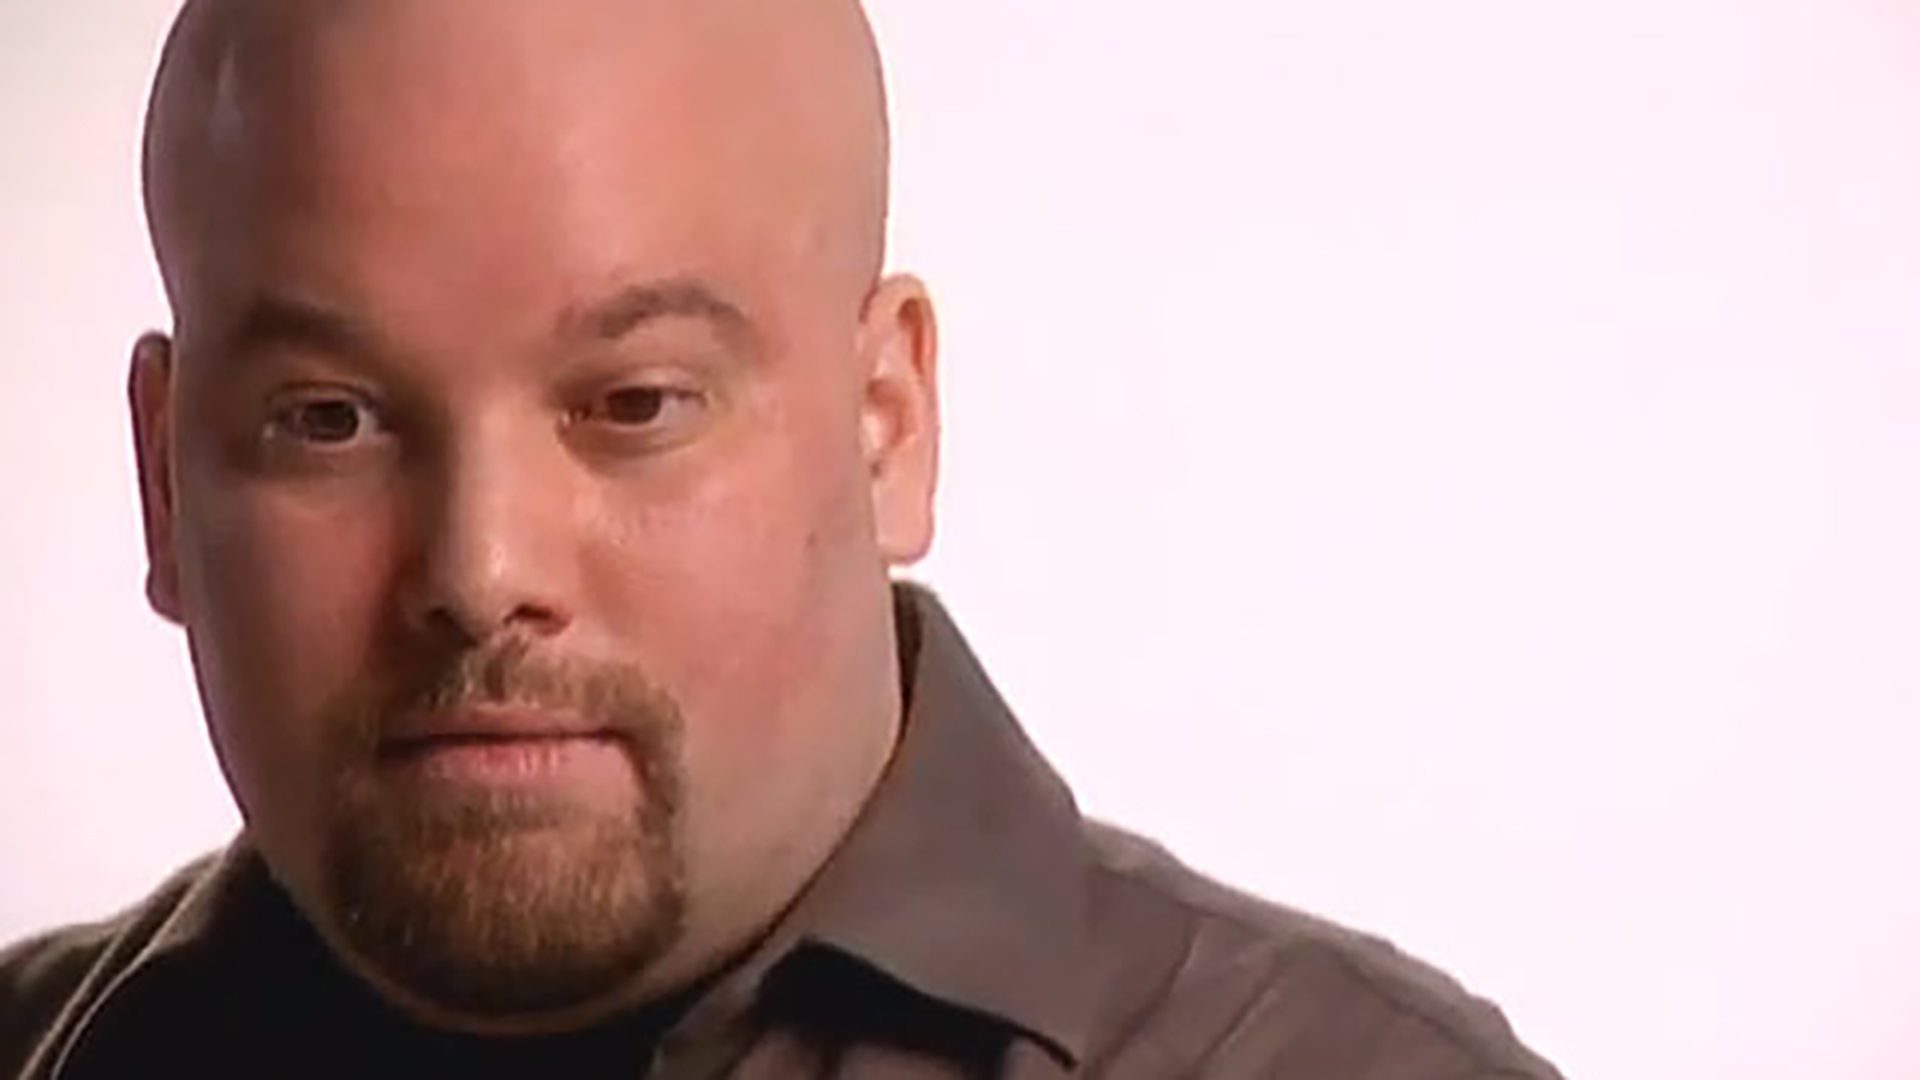 A bald man with a goatee wearing a brown collared shirt is interviewed against a white background